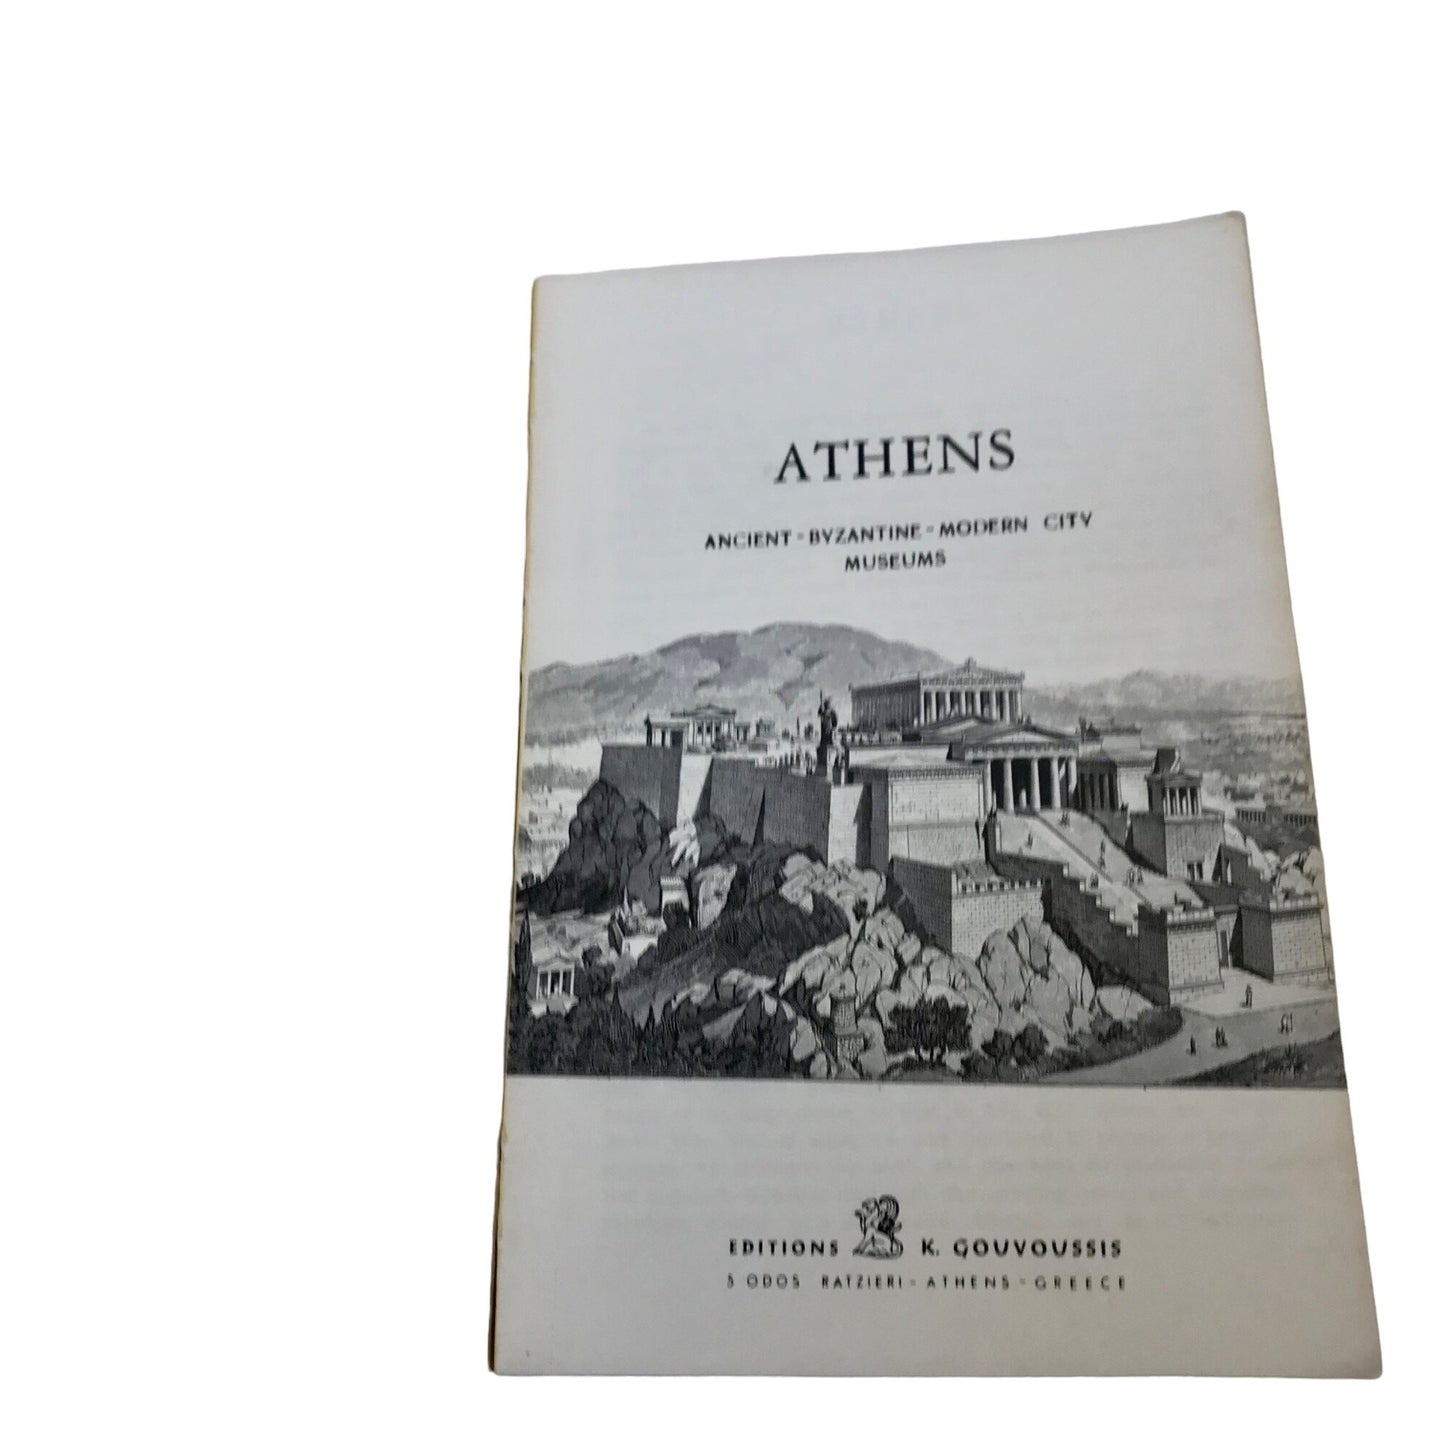 Vintage Athens Book Travel Greece Editions C. Gouvoussis